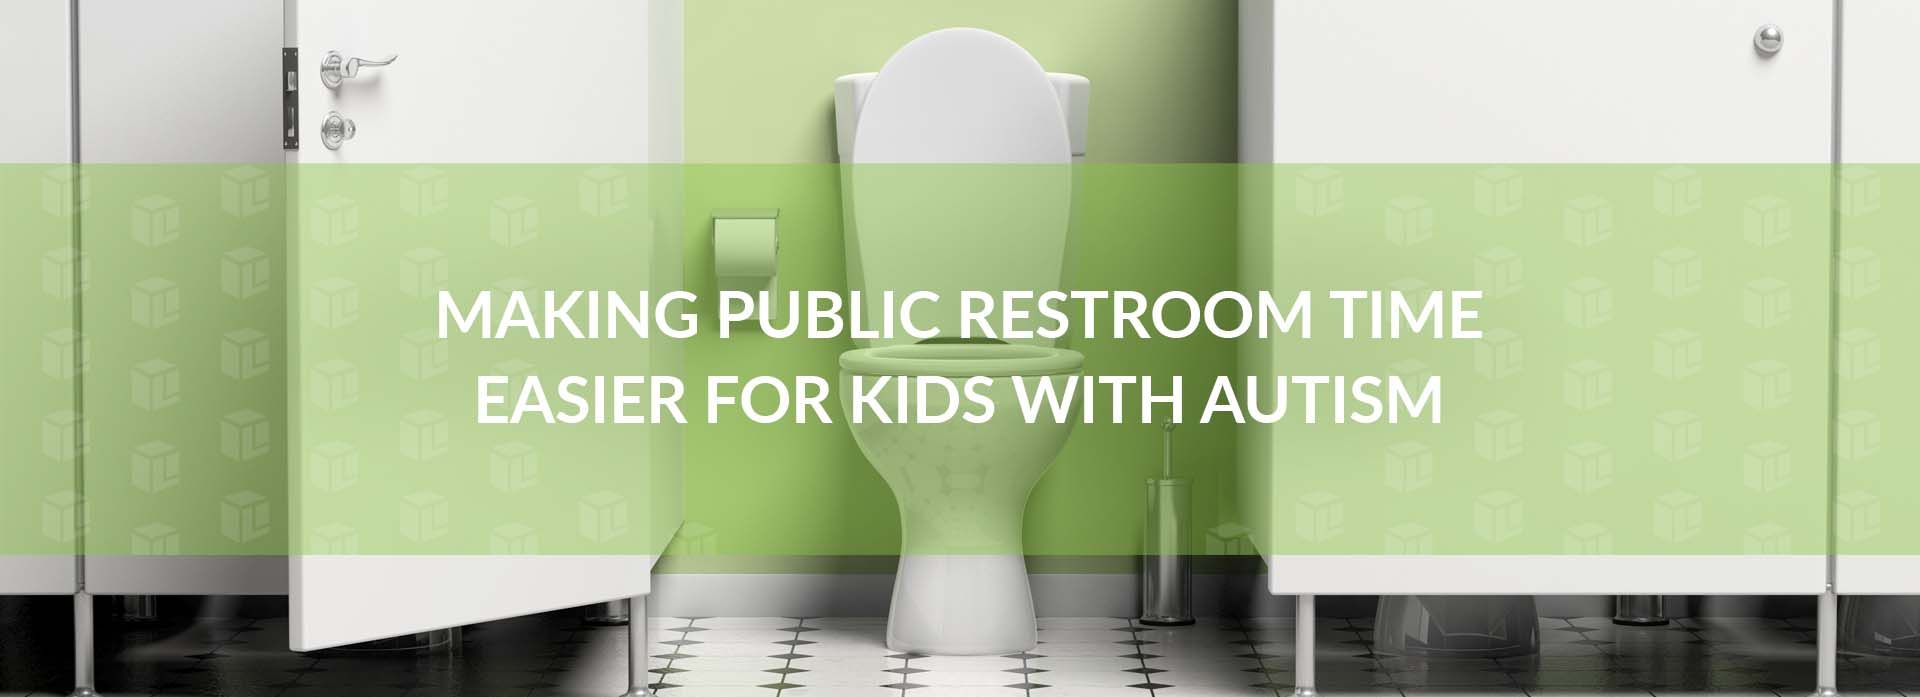 Making Public Restroom Time Easier For Kids With Autism